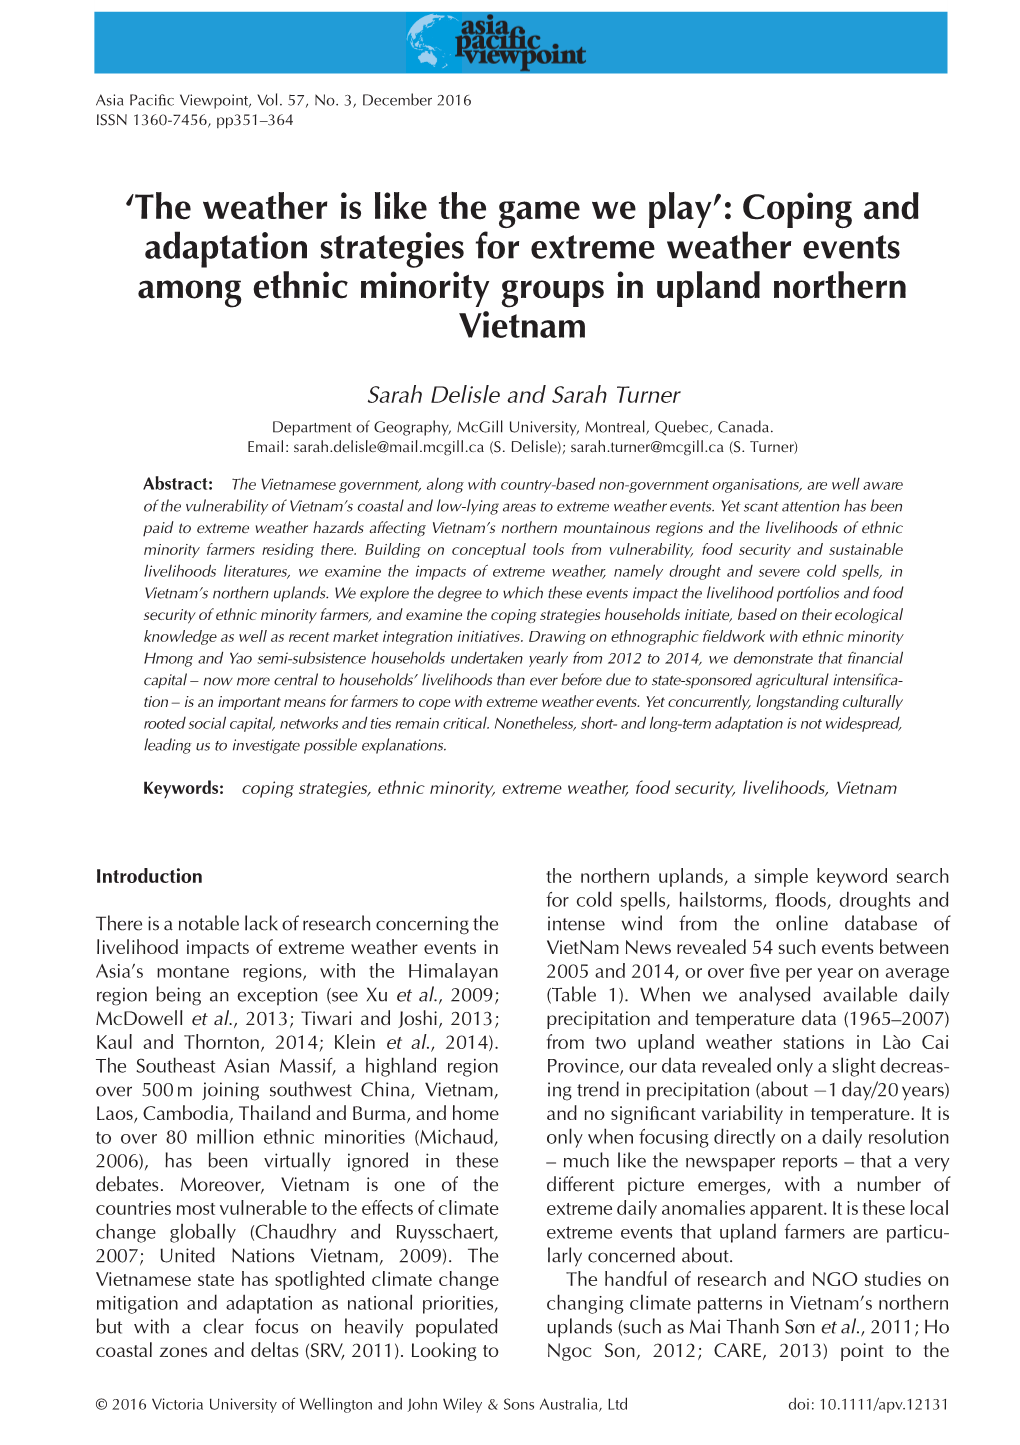 Coping and Adaptation Strategies for Extreme Weather Events Among Ethnic Minority Groups in Upland Northern Vietnam